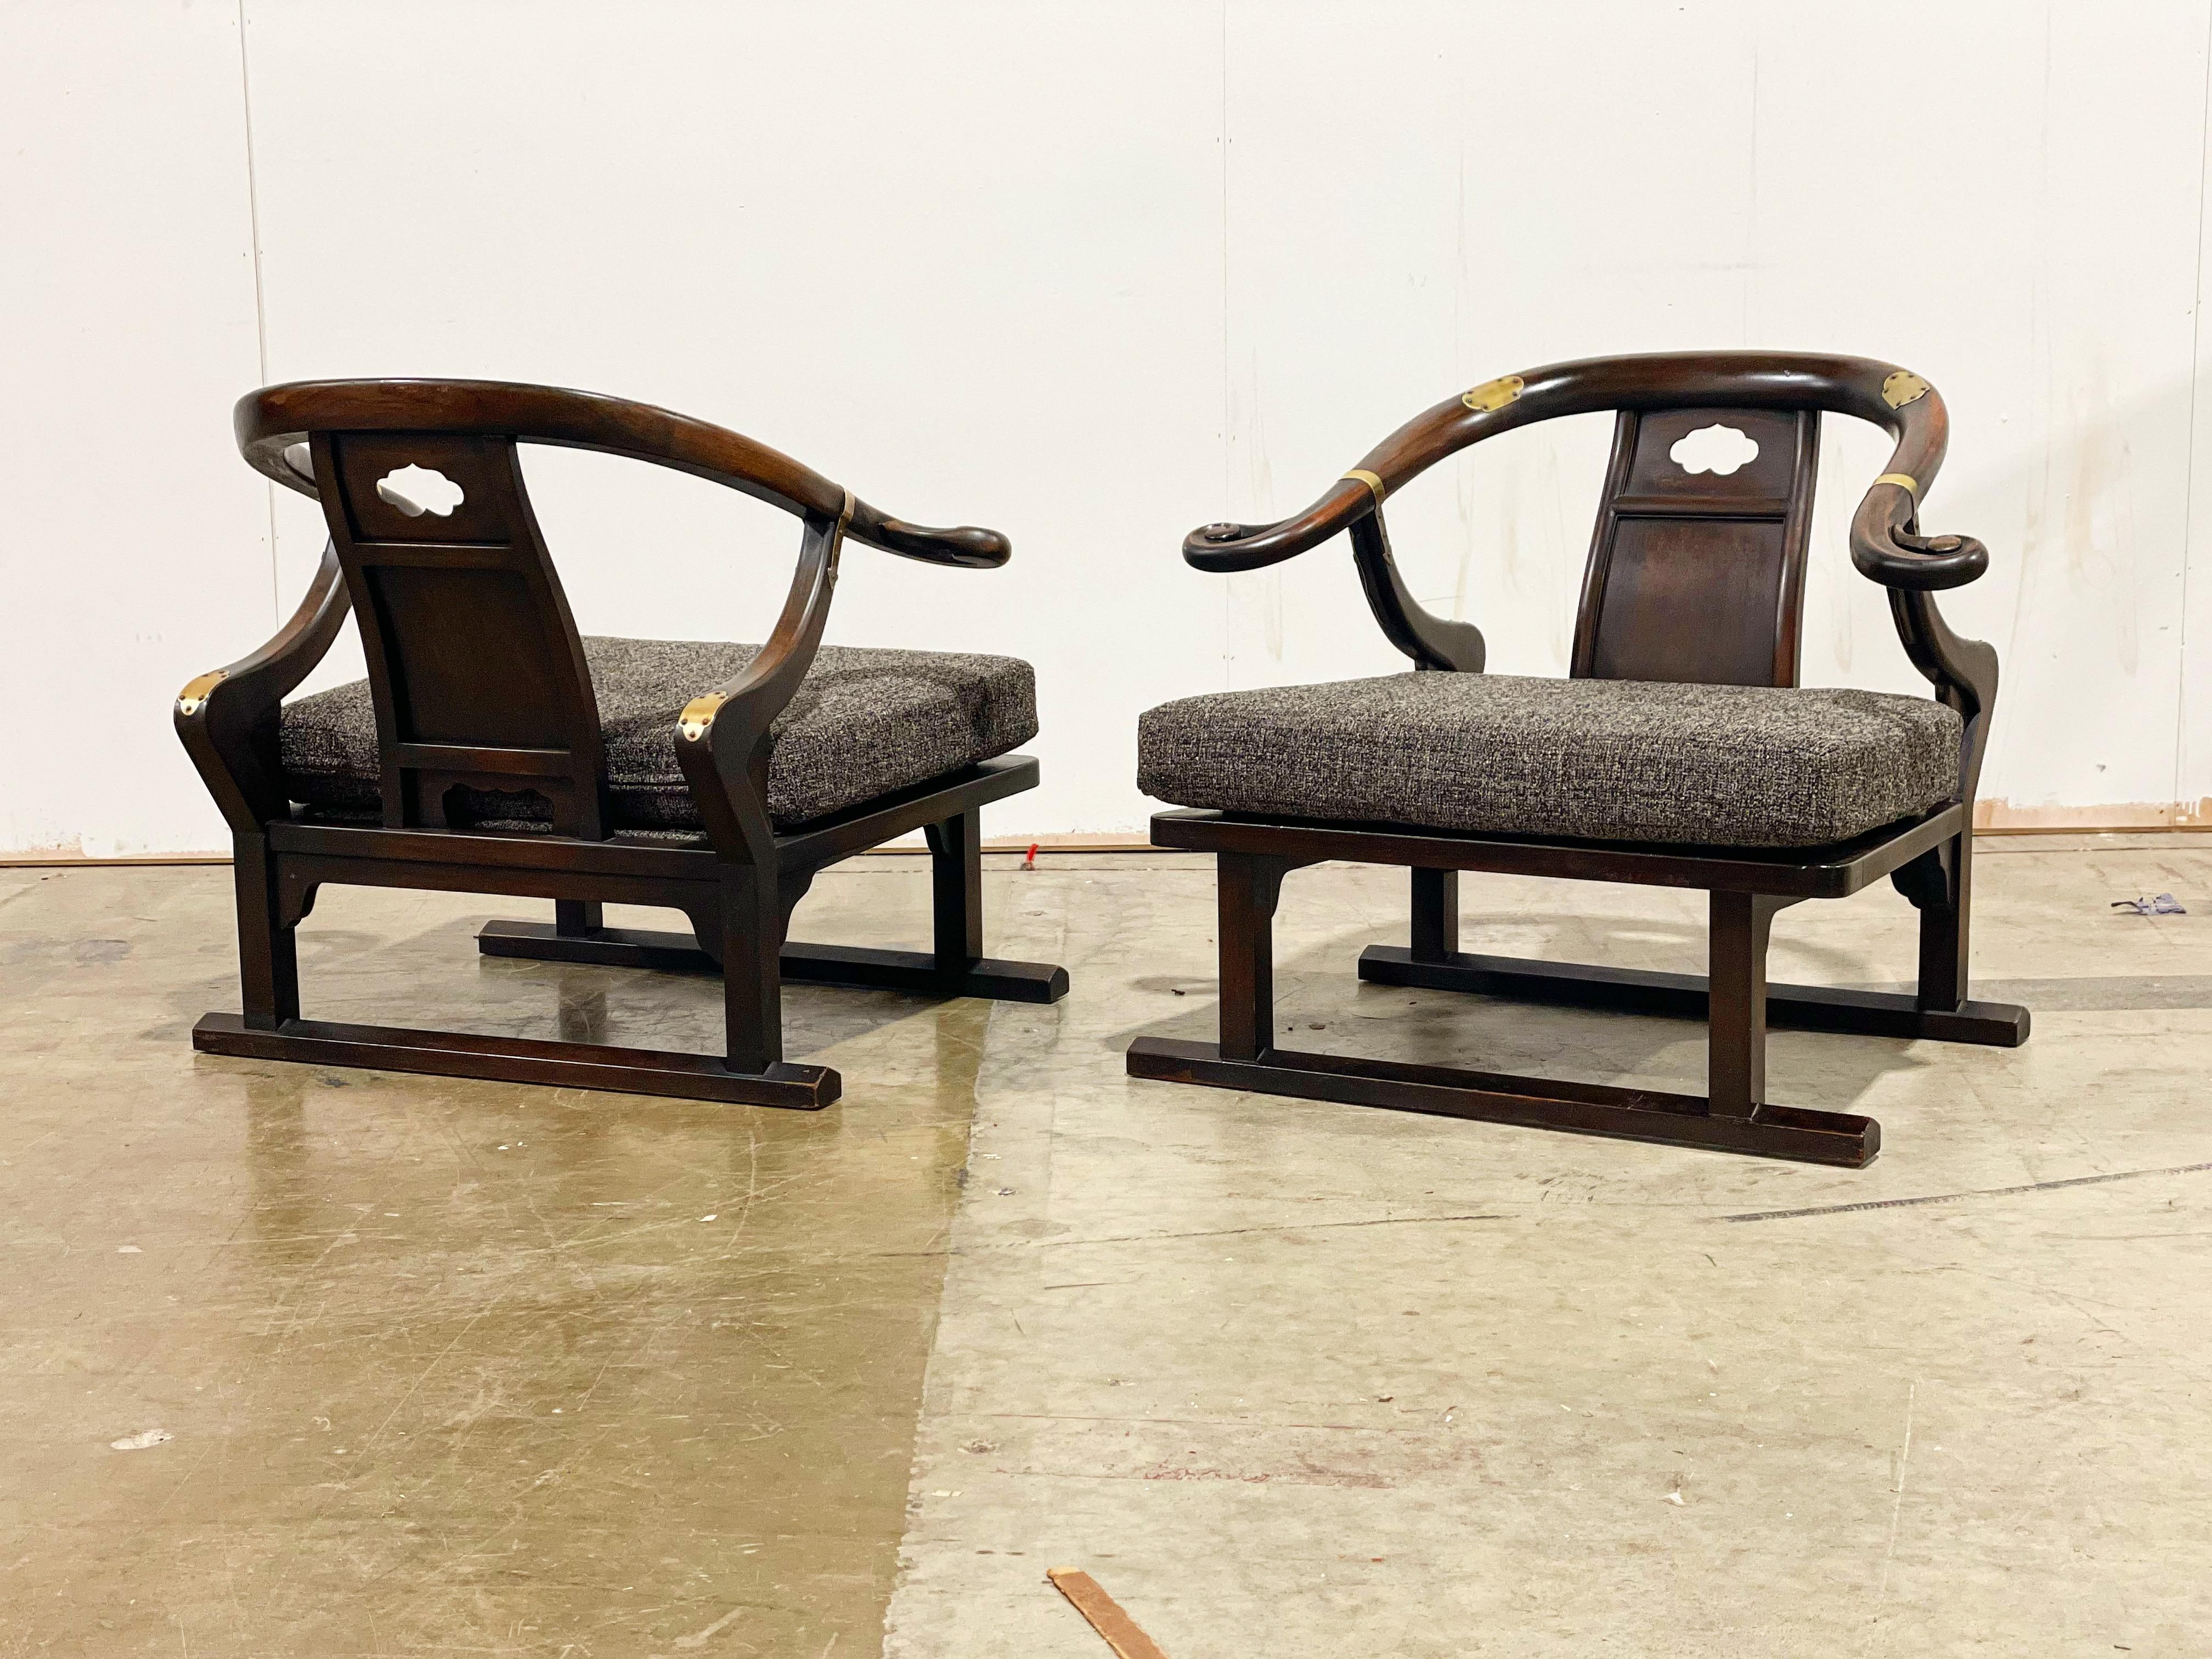 Michael Taylor for Baker - Far East Collection - Model 2510 - circa 1948
Exquisite pair of sculpted solid walnut and brass lounge chairs. Horseshoe or wishbone back with sled base. Stout and sturdy American craftsmanship.
This pair is in excellent